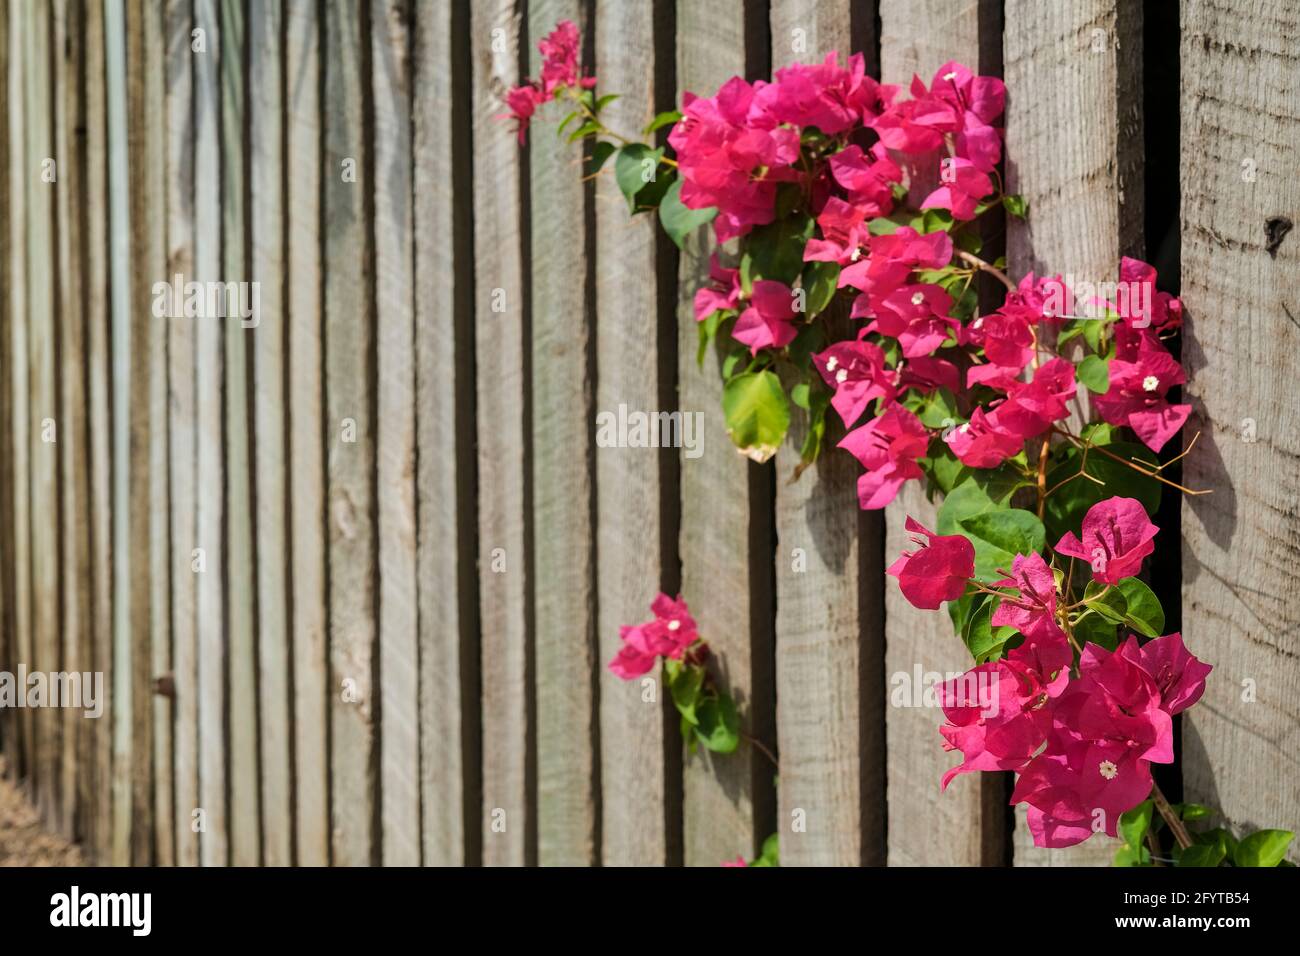 Pink flowers of the Bougainvillea spectabilis against a wooden fence. Stock Photo